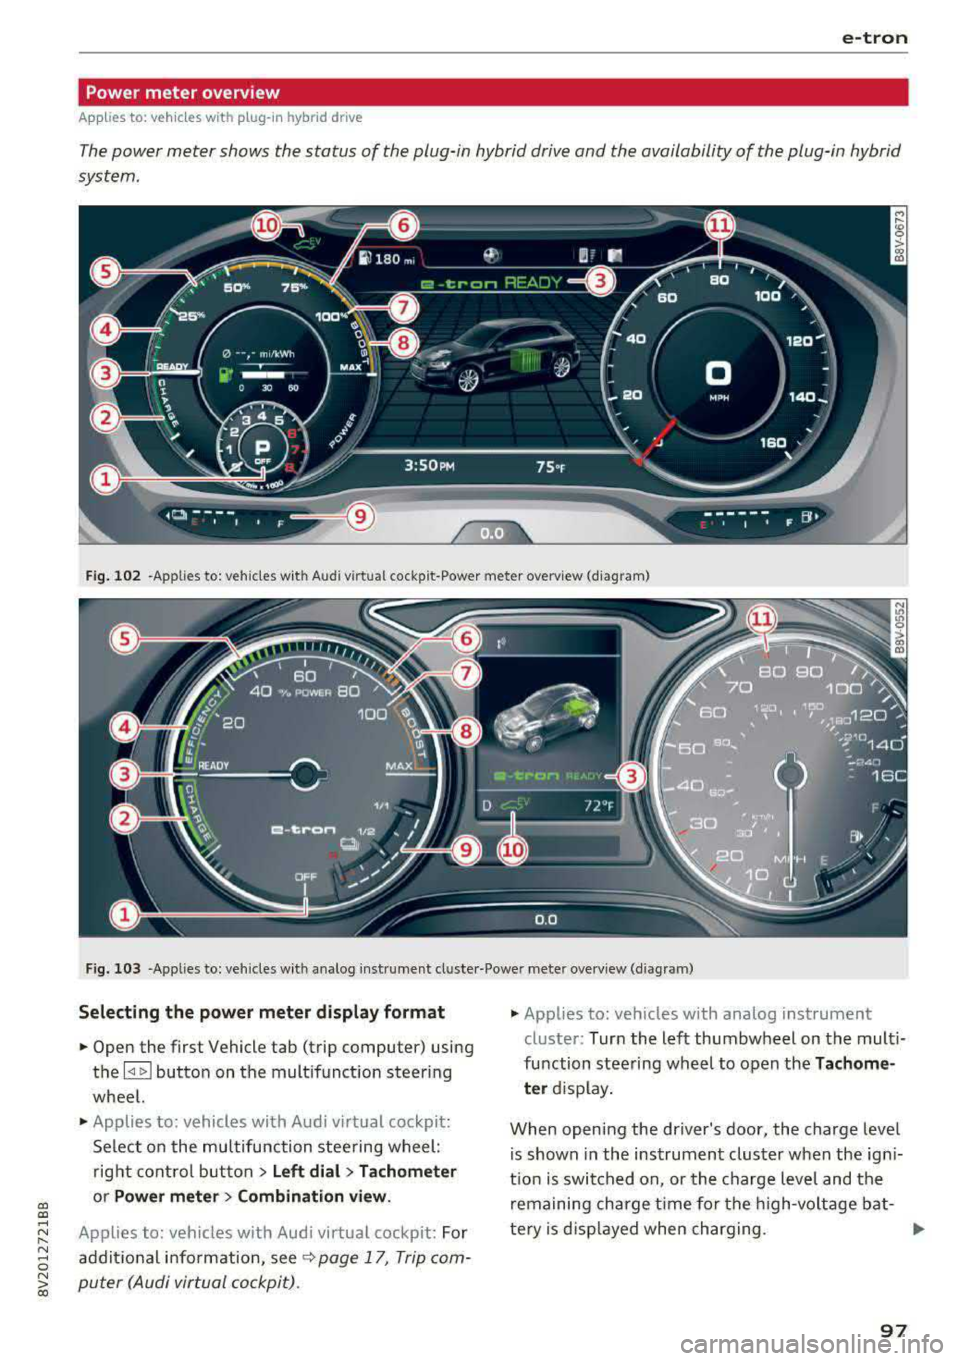 AUDI A3 SEDAN 2017  Owners Manual a,  a, ..... N 
" N ..... 0 N > 00 
e-tron 
Power meter  overview 
Applies  to:  vehicles with plug-in  hybrid  dr ive 
The power  meter  shows  the  status  of  the  plug -in hybrid drive and  the  a